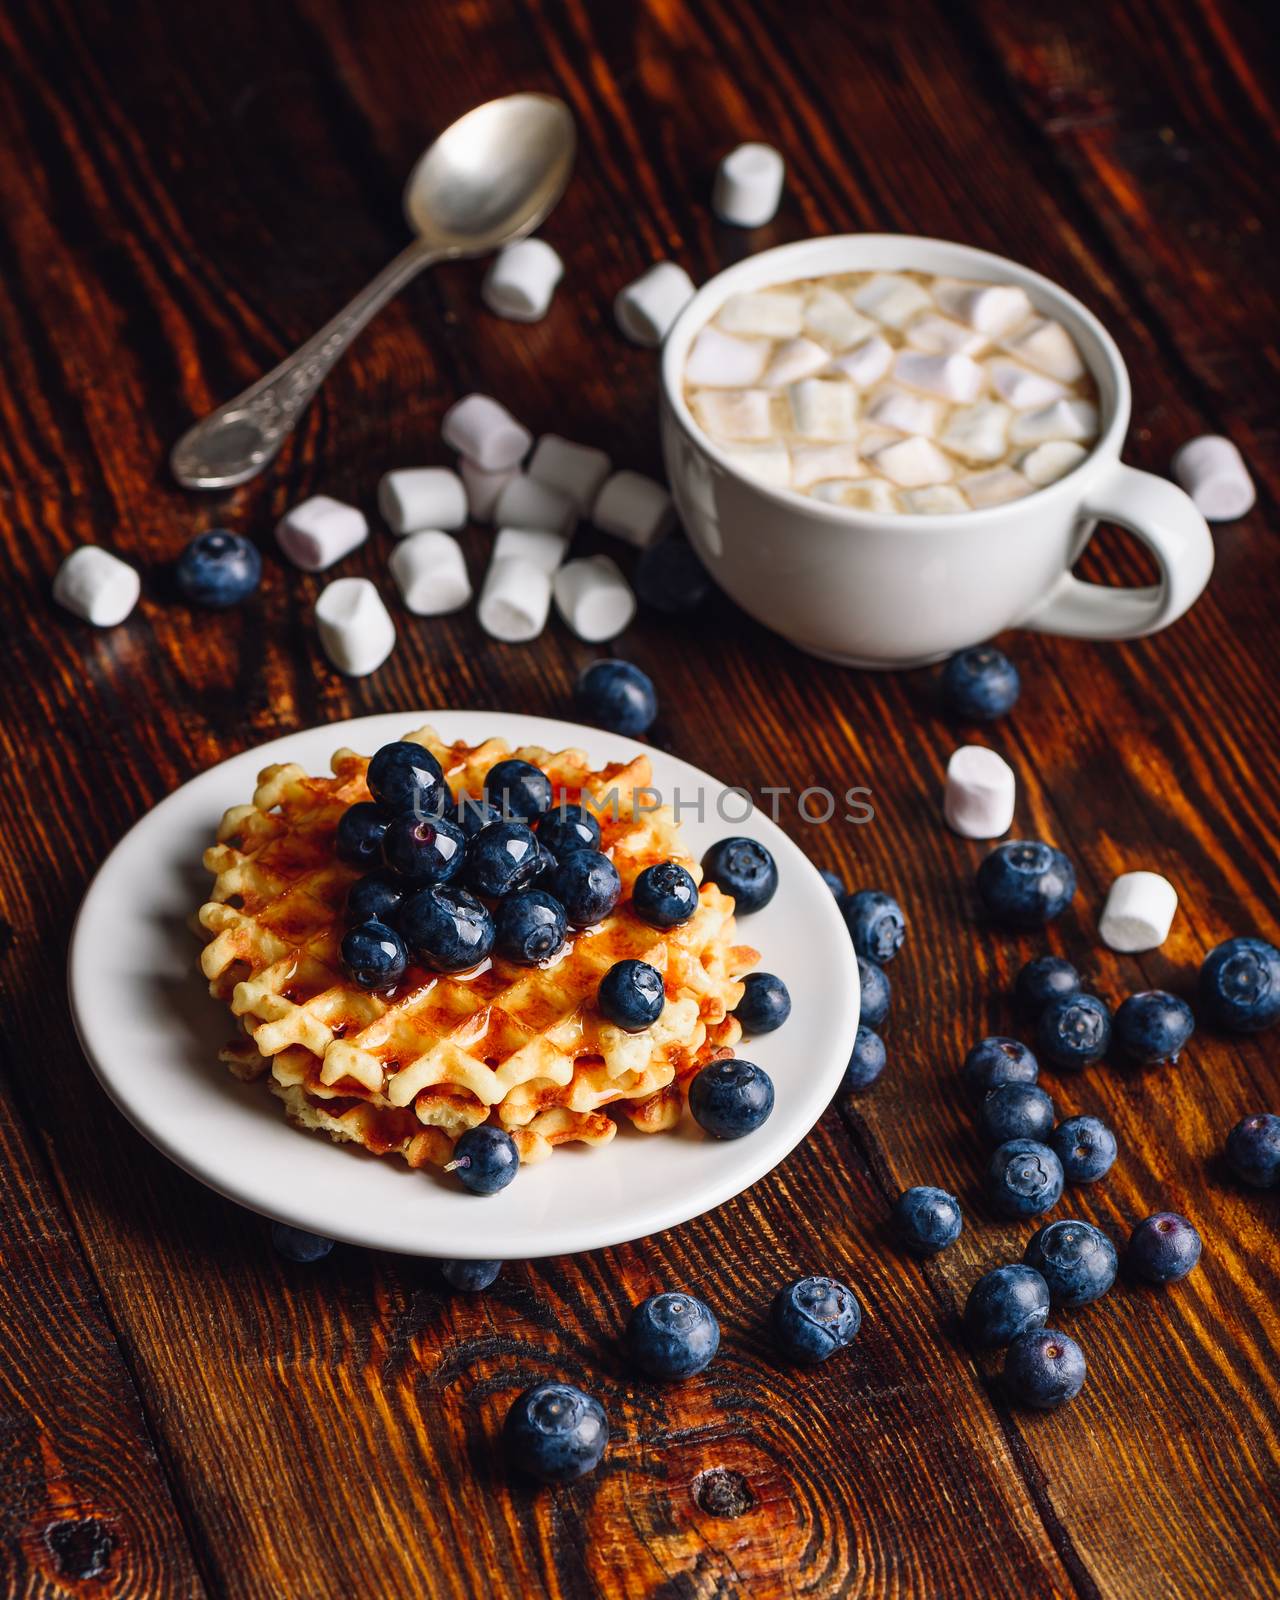 Waffles with Blueberry and Cup of Coffee. by Seva_blsv